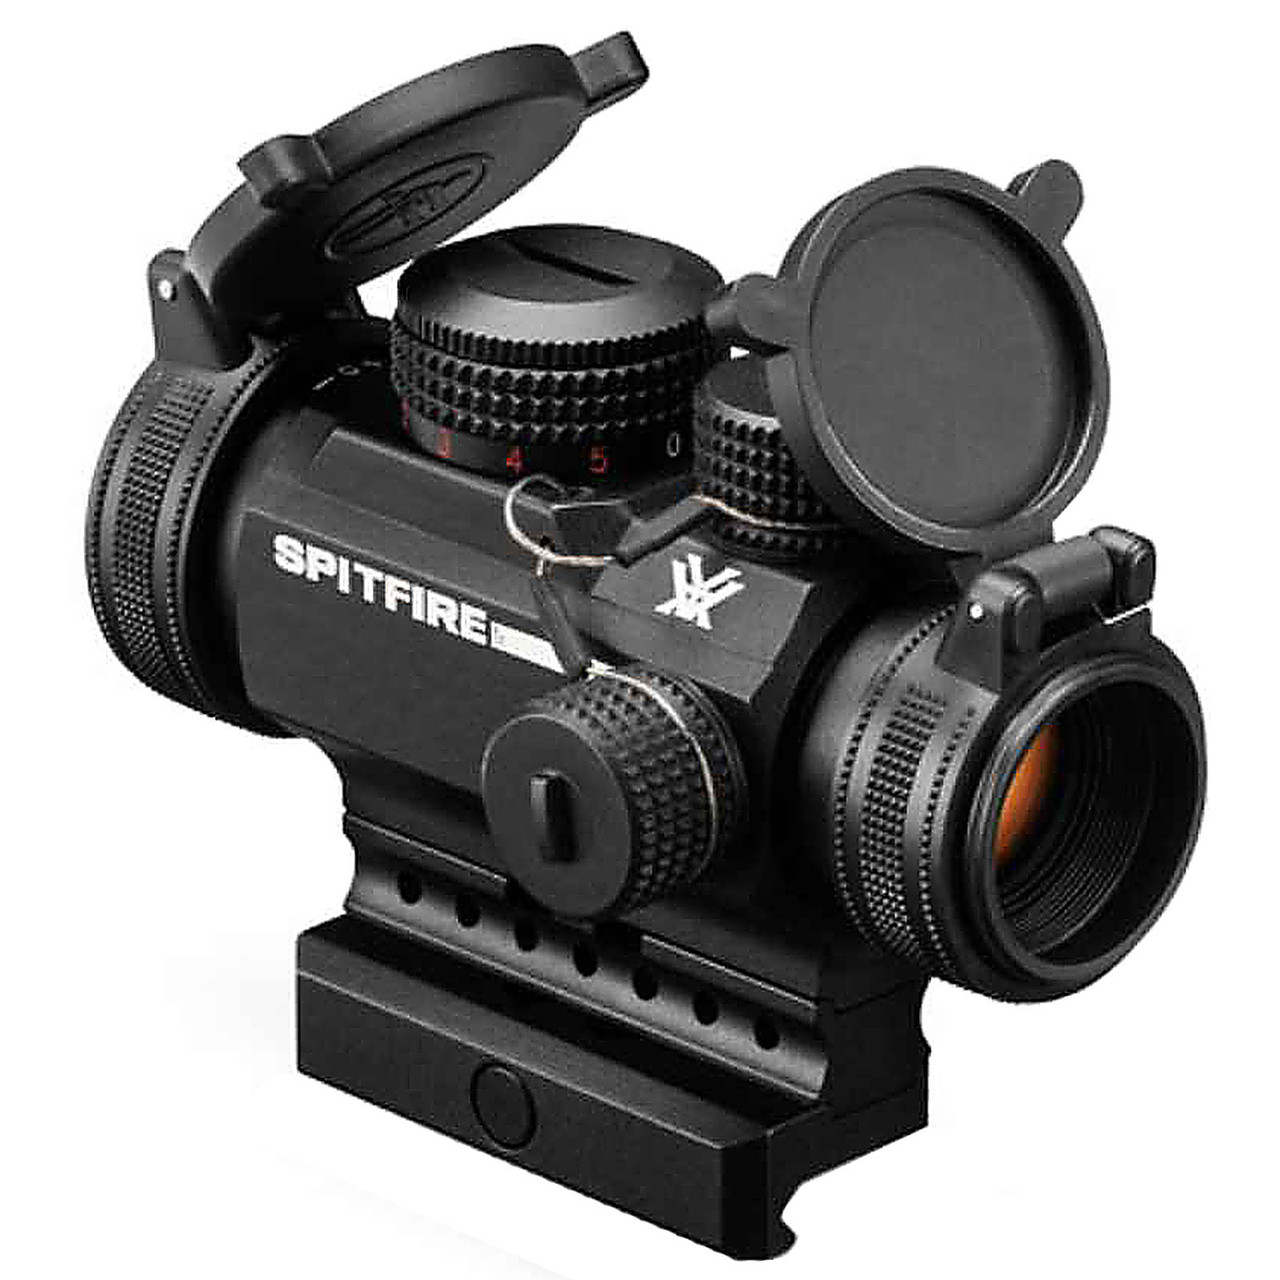 Vortex Spitfire 1x-AR Prism Scope 1x25 with DRT MOA Reticle